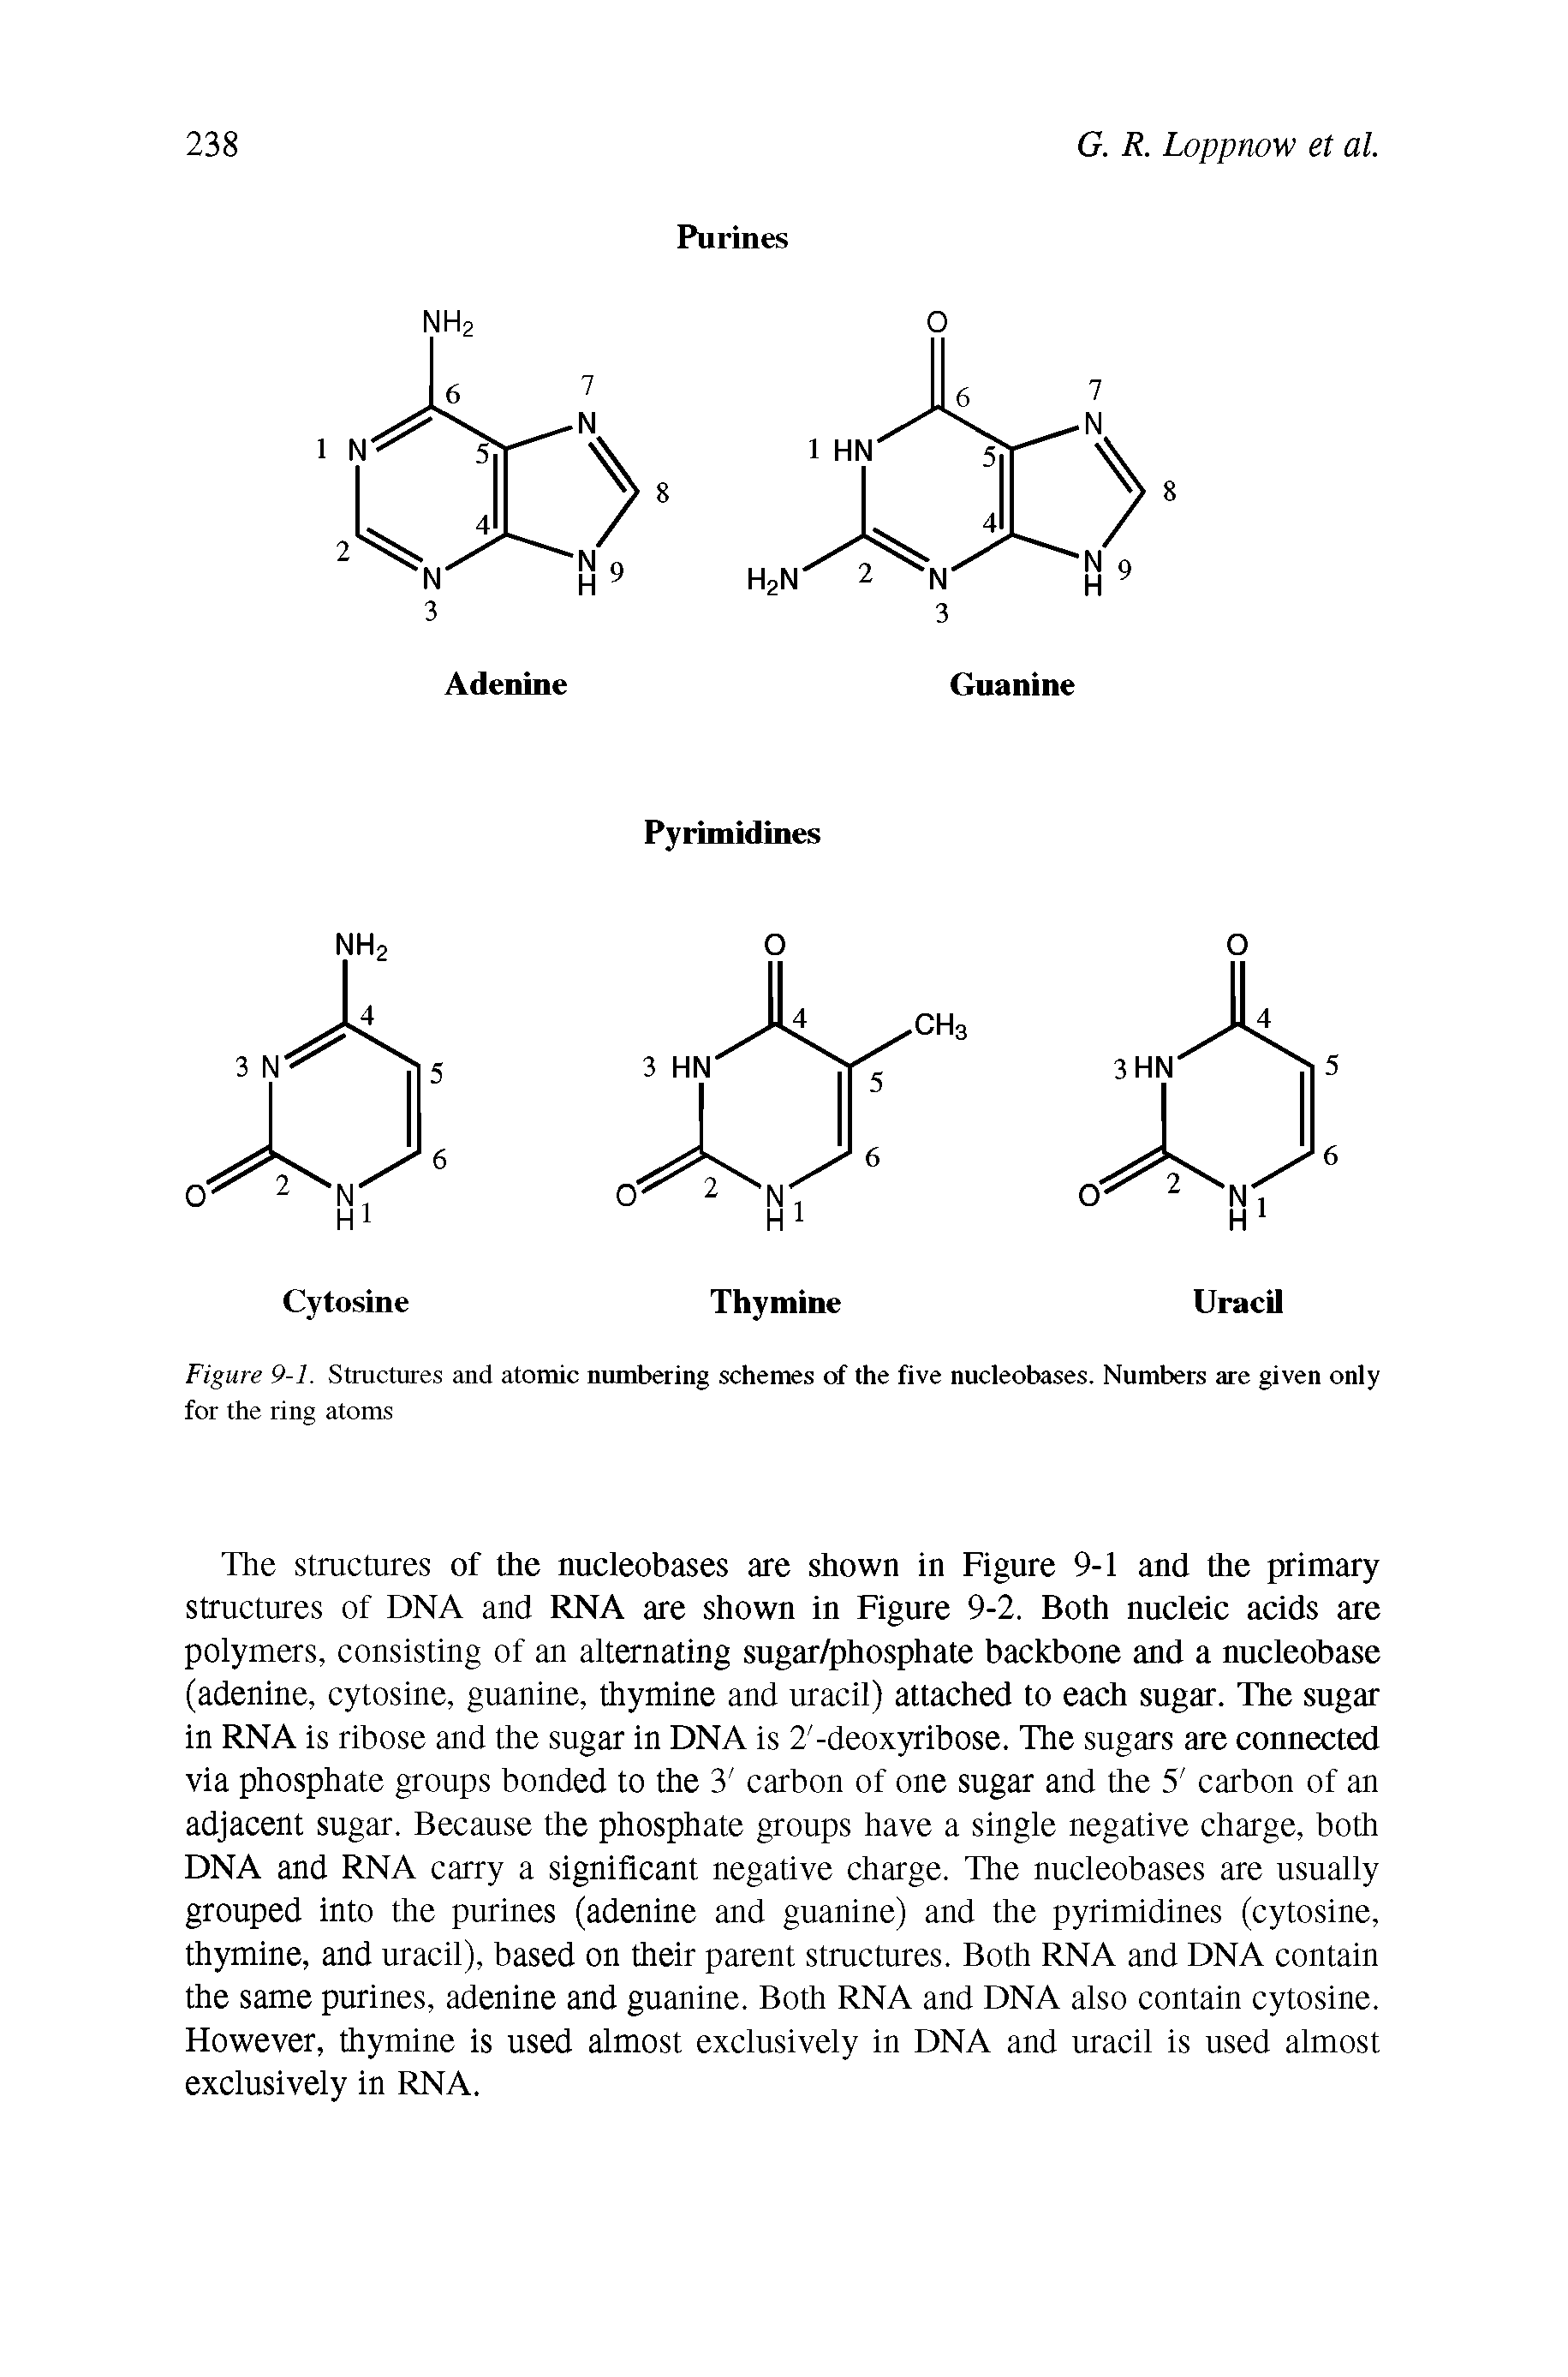 Figure 9-1. Structures and atomic numbering schemes of the five nucleobases. Numbers are given only for the ring atoms...